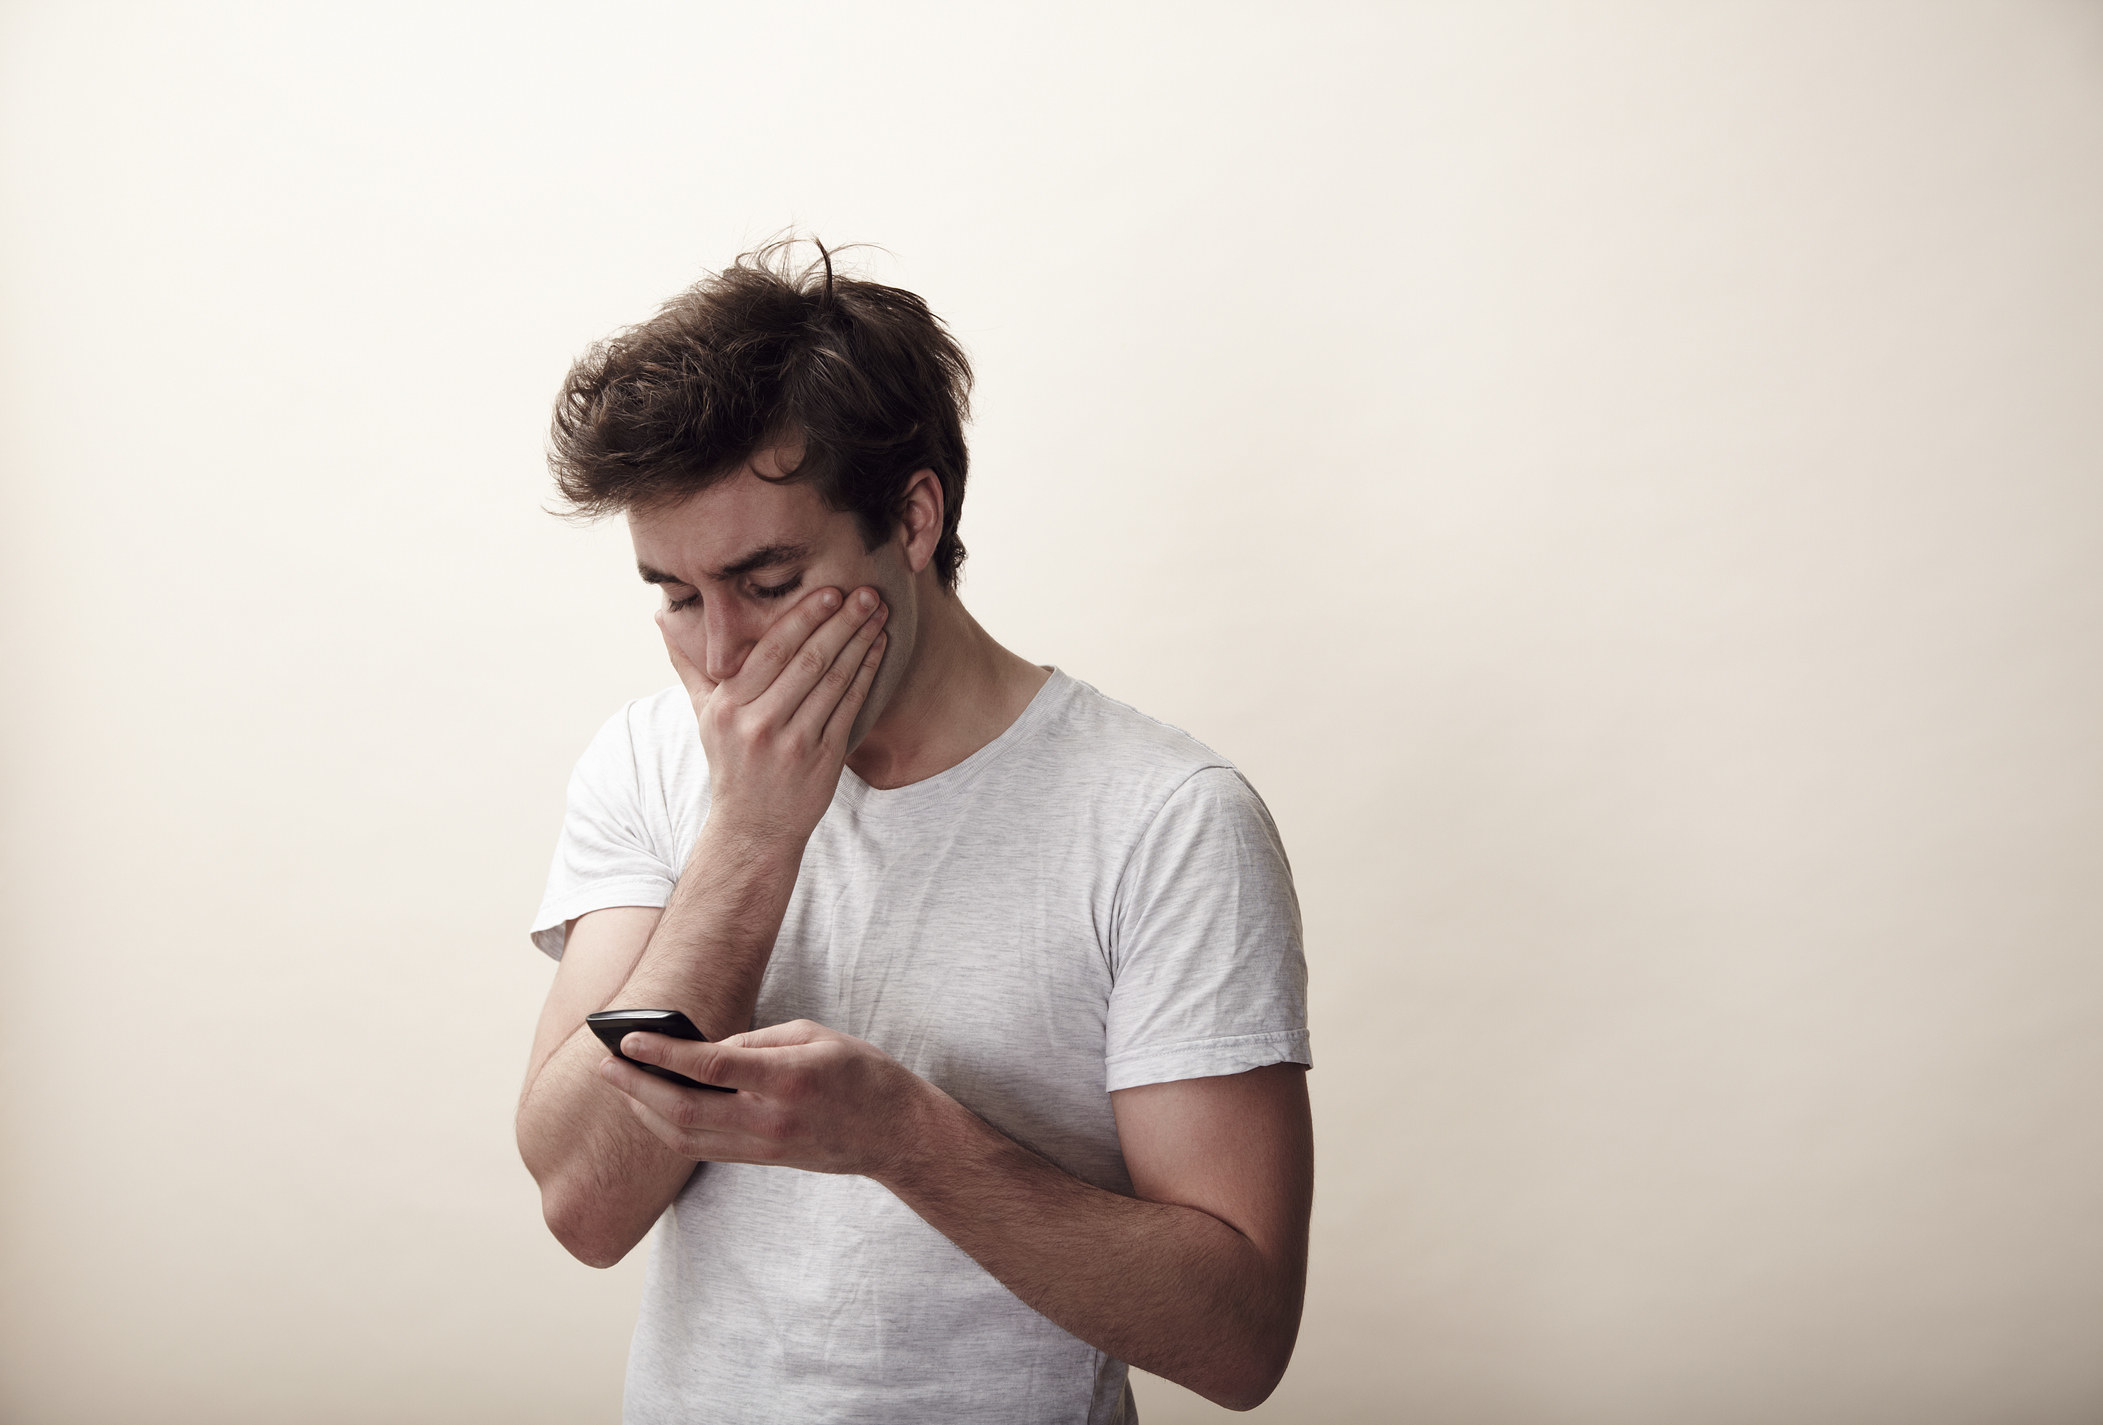 A man looking at his phone and covering his mouth in disbelief